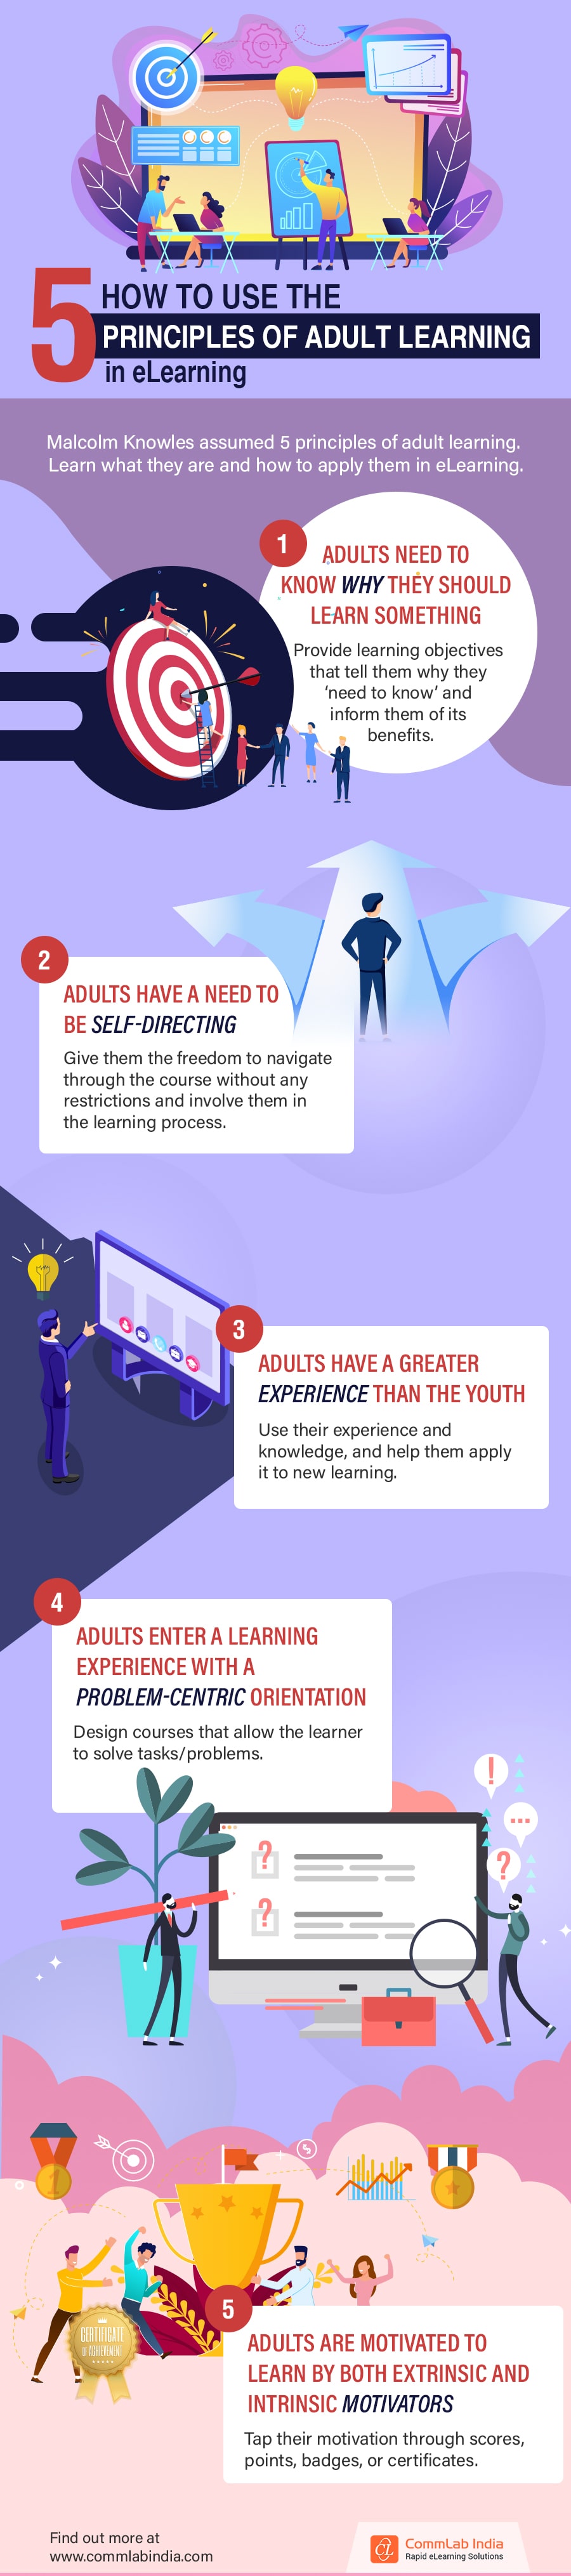 How to Use the Principles of Adult Learning in eLearning [Infographic]